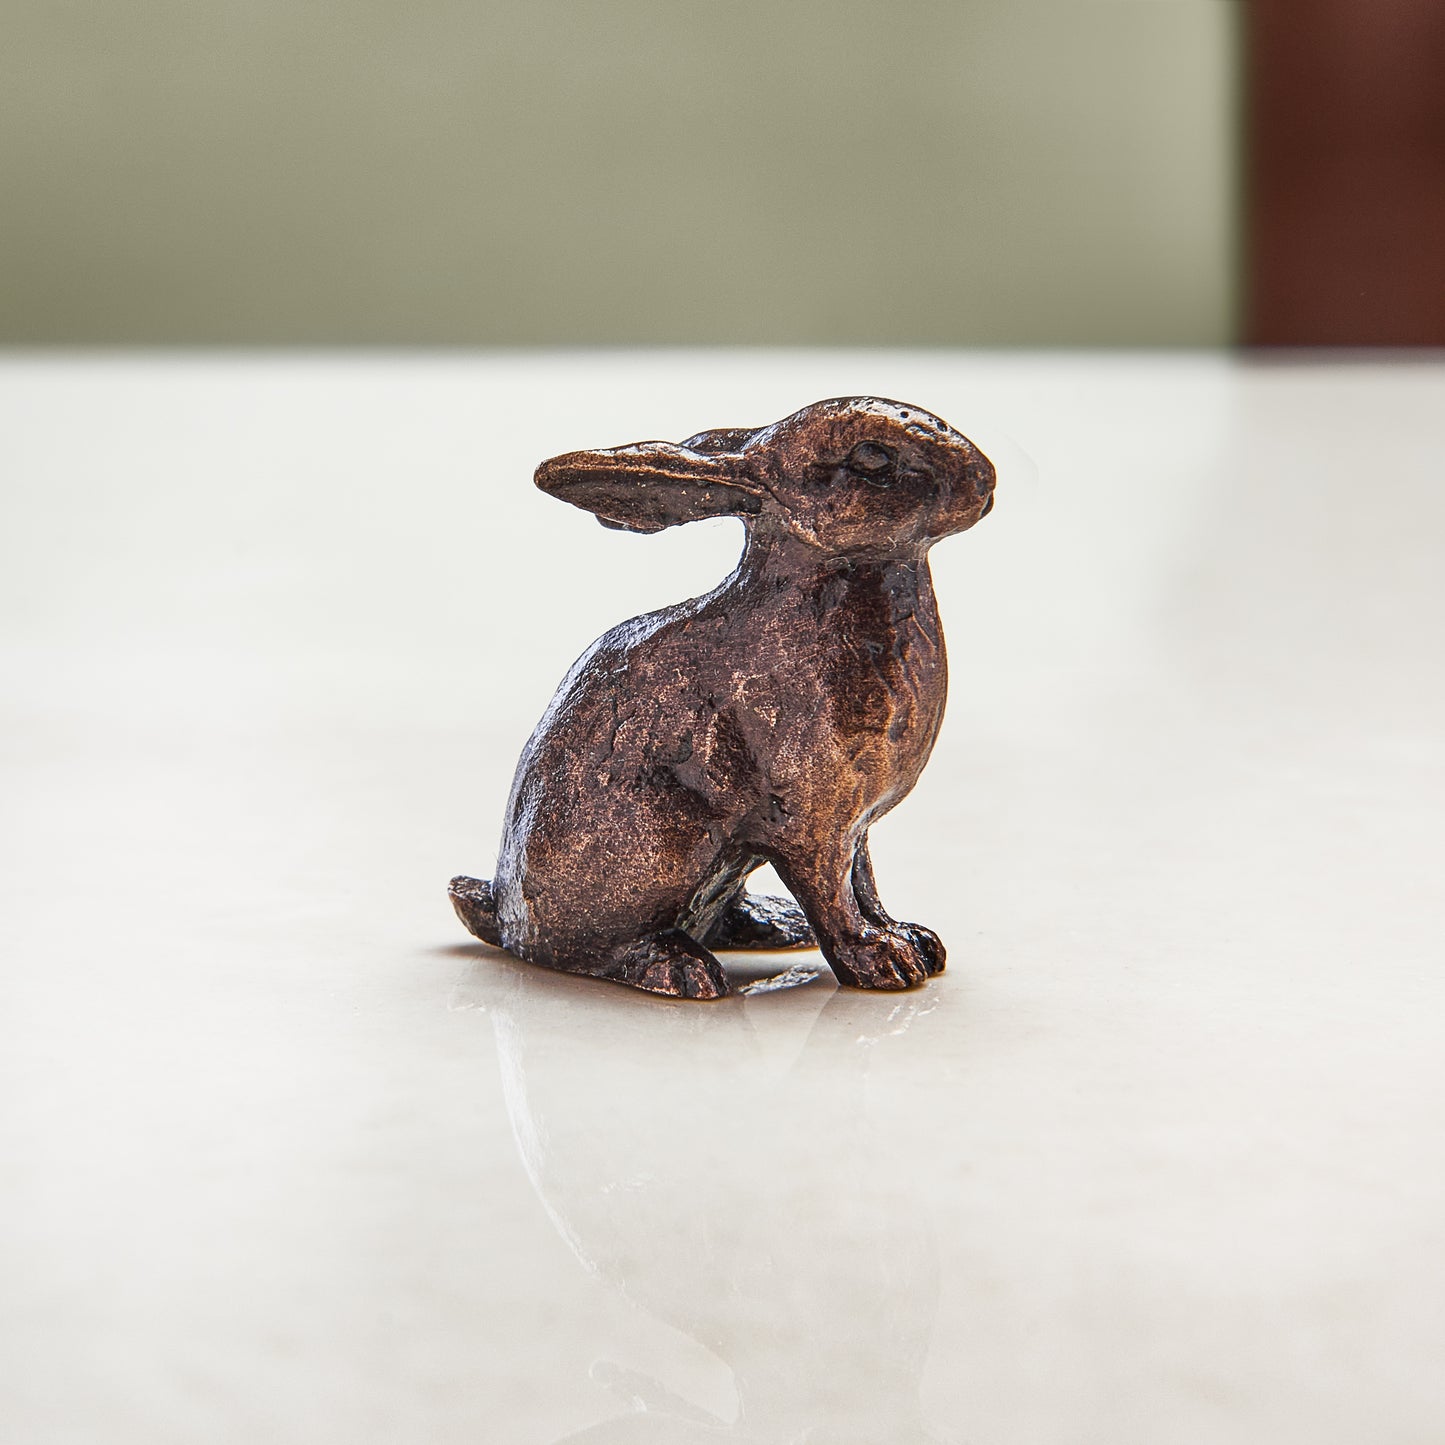 Miniature bronze figurine of a rabbit. Give as a bronze anniversary gift or thoughtful birthday gift.